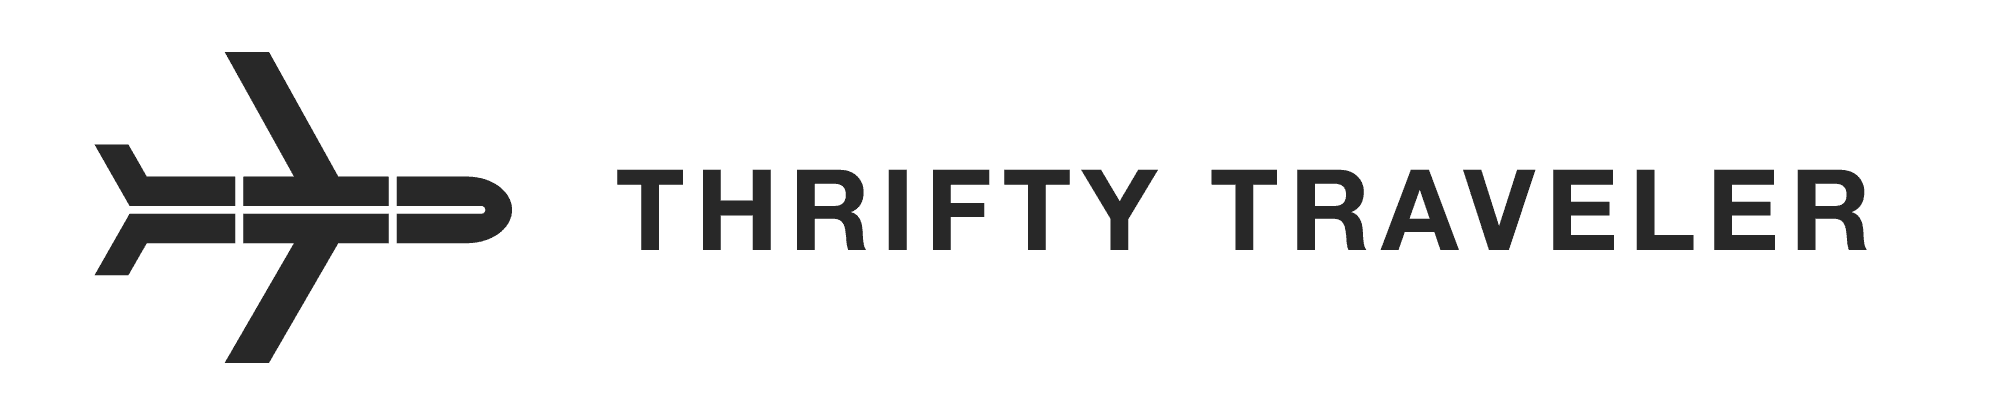 Thrifty Traveler Coupon: Save Up To $250+ On Every Flight